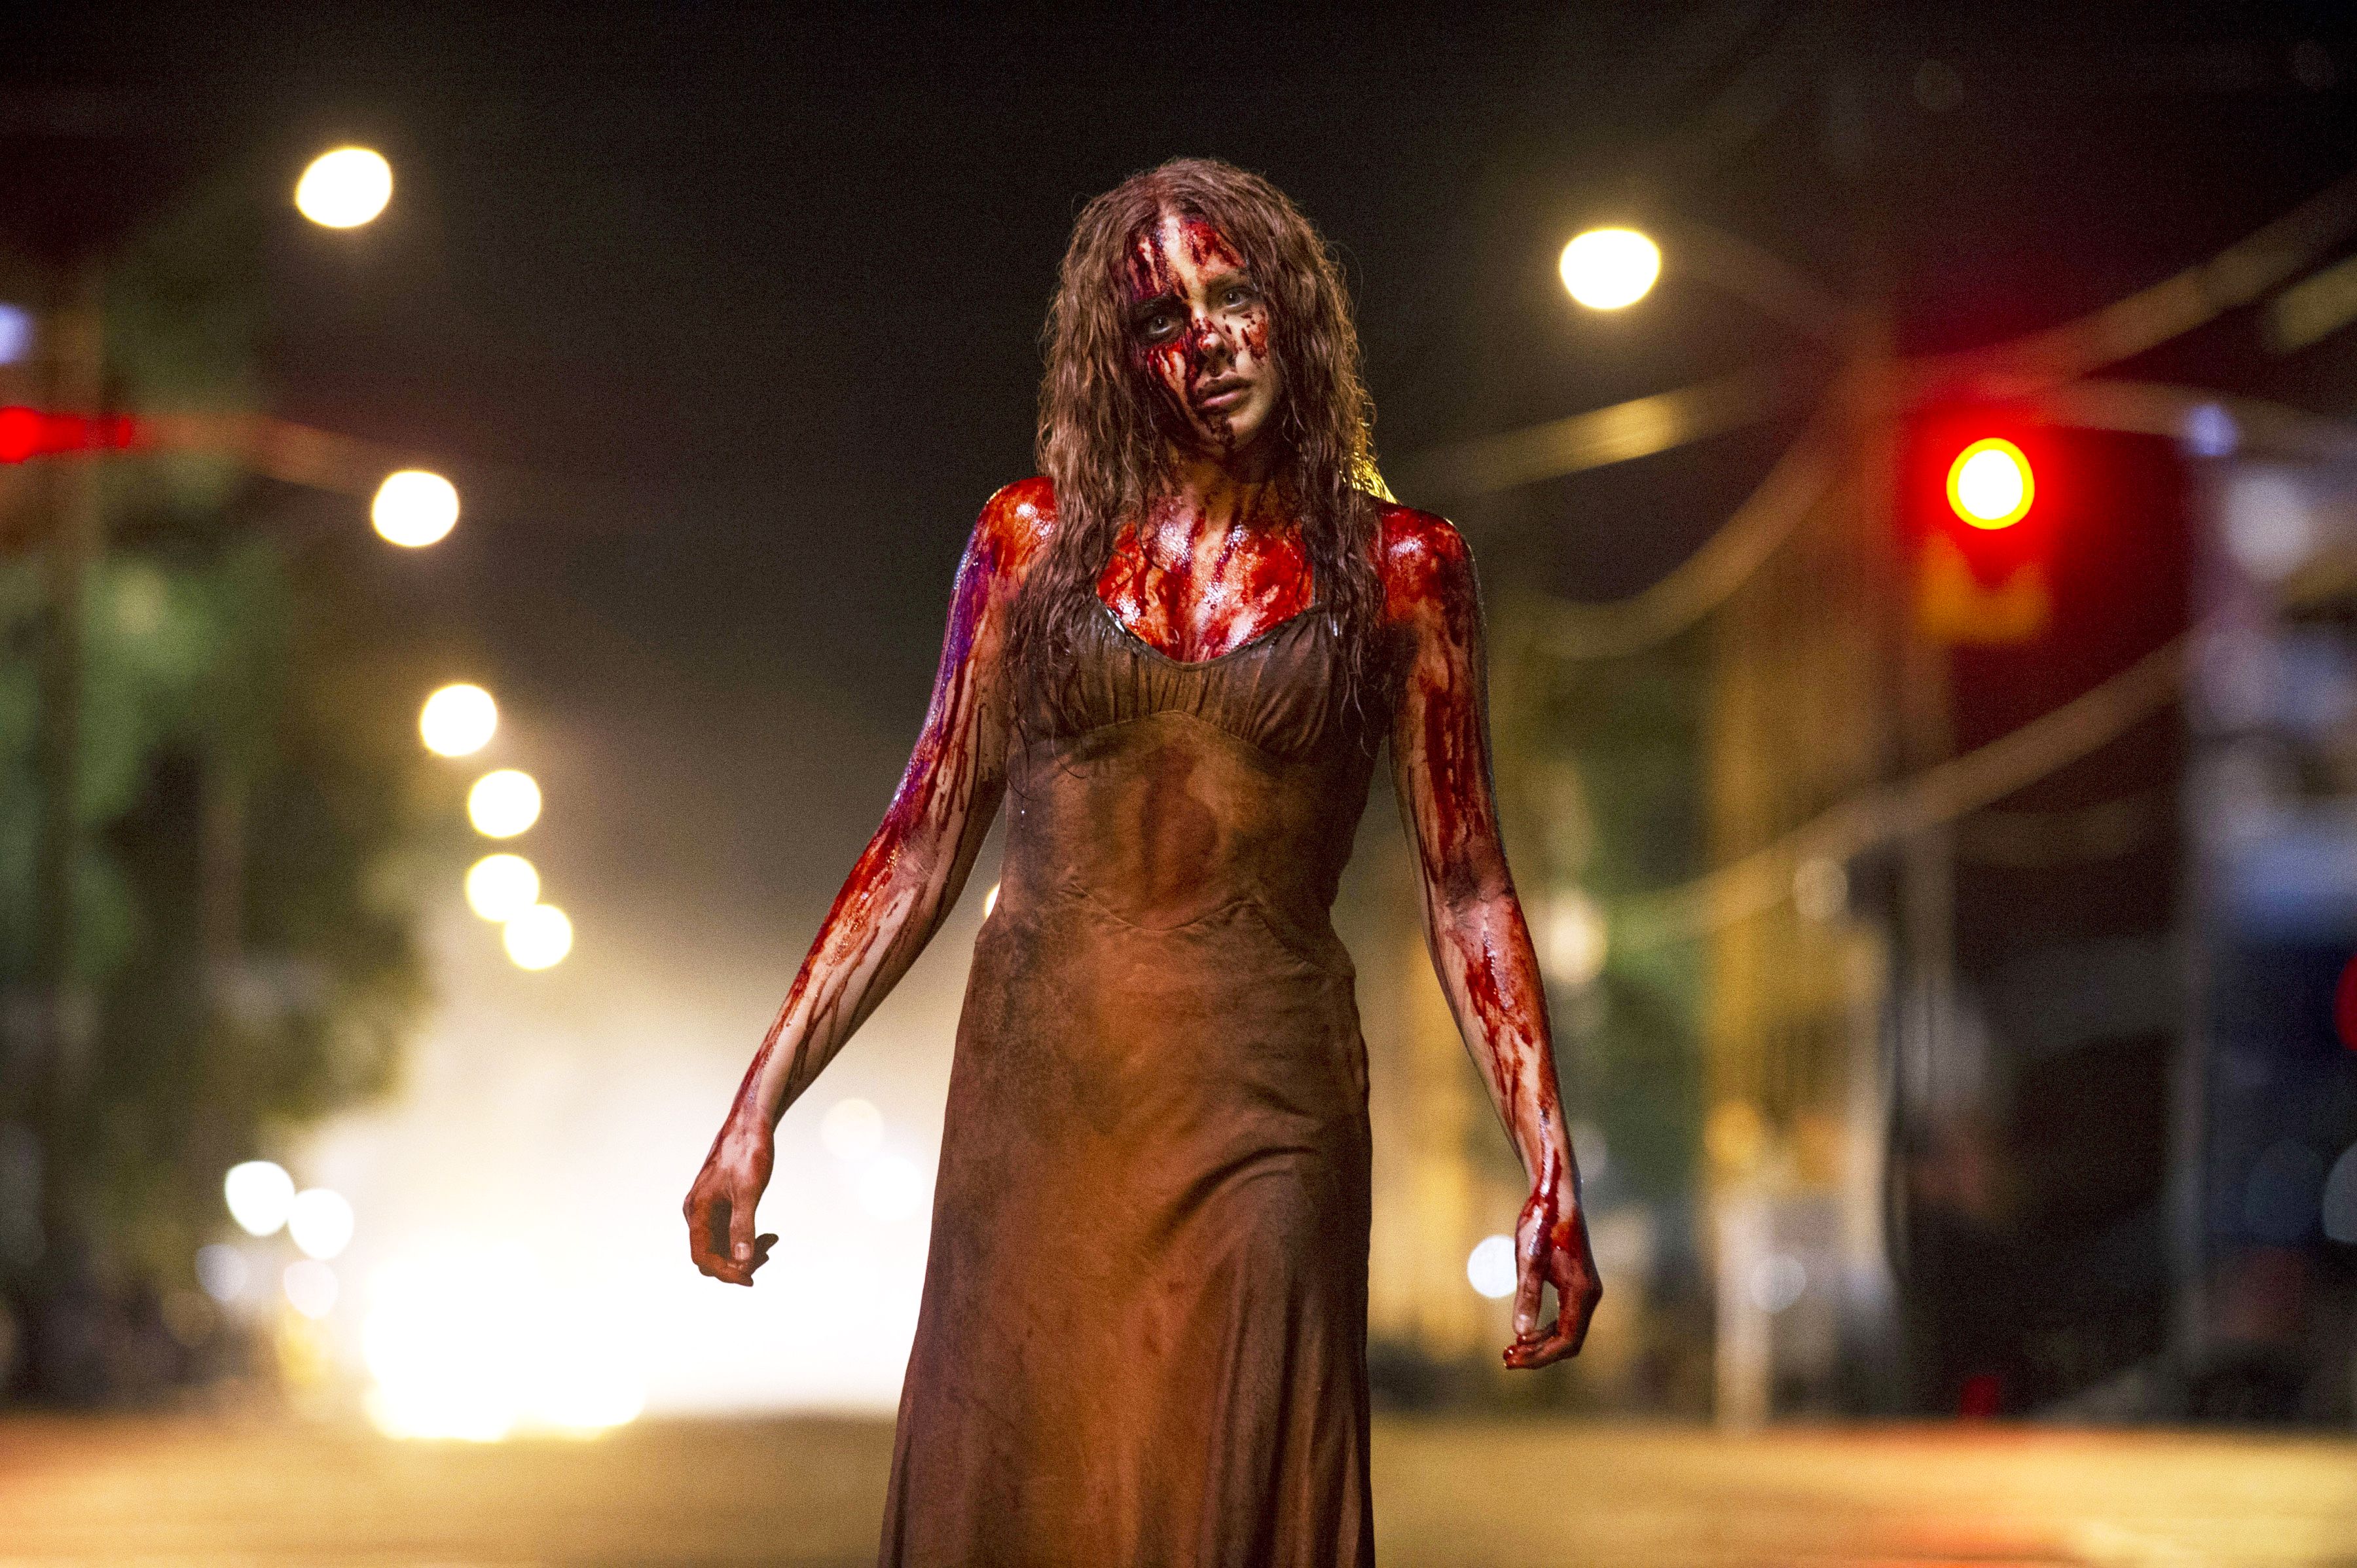 11 Steps to Getting Carrie-fied for Halloween - Halloween Carrie Makeover